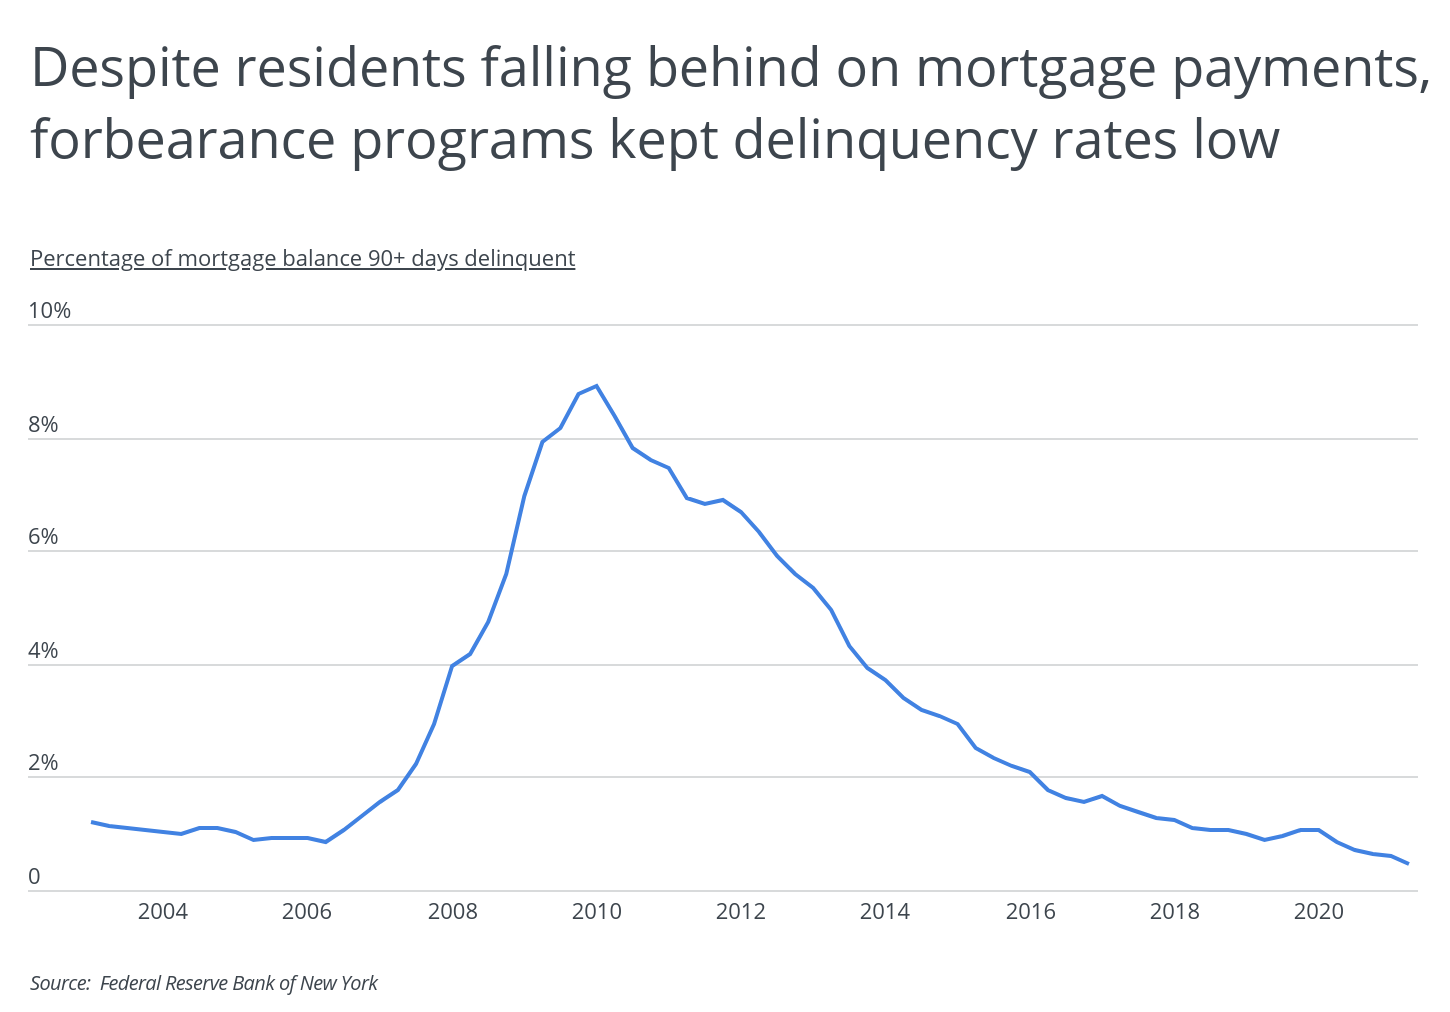 Despite residents falling behing on mortagage payments, forbearance programs kept delinquency rates low